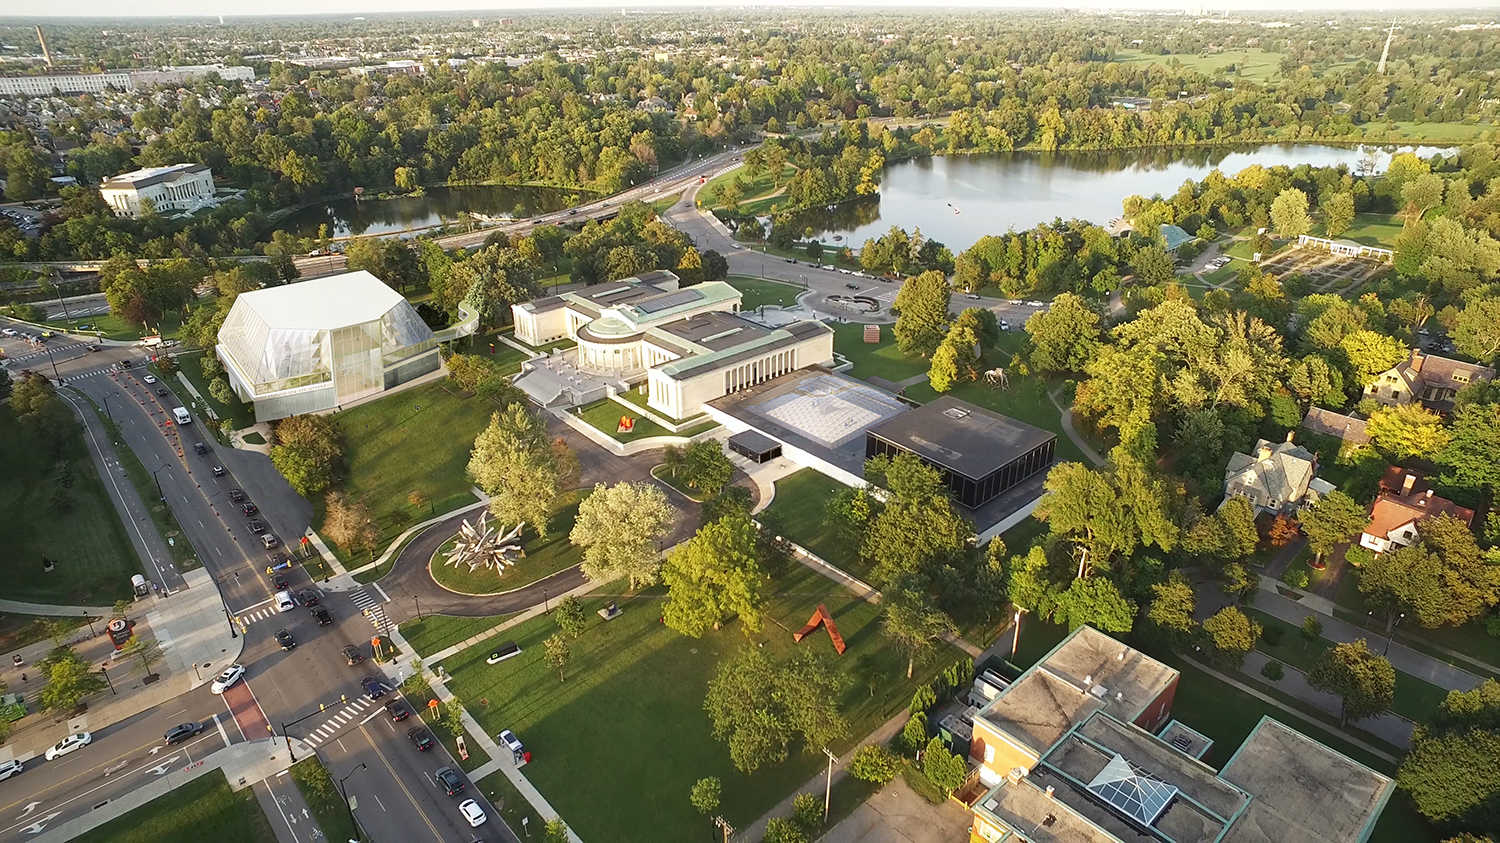 Aerial view of the museum's campus with a rendering of the new north building in the upper left corner